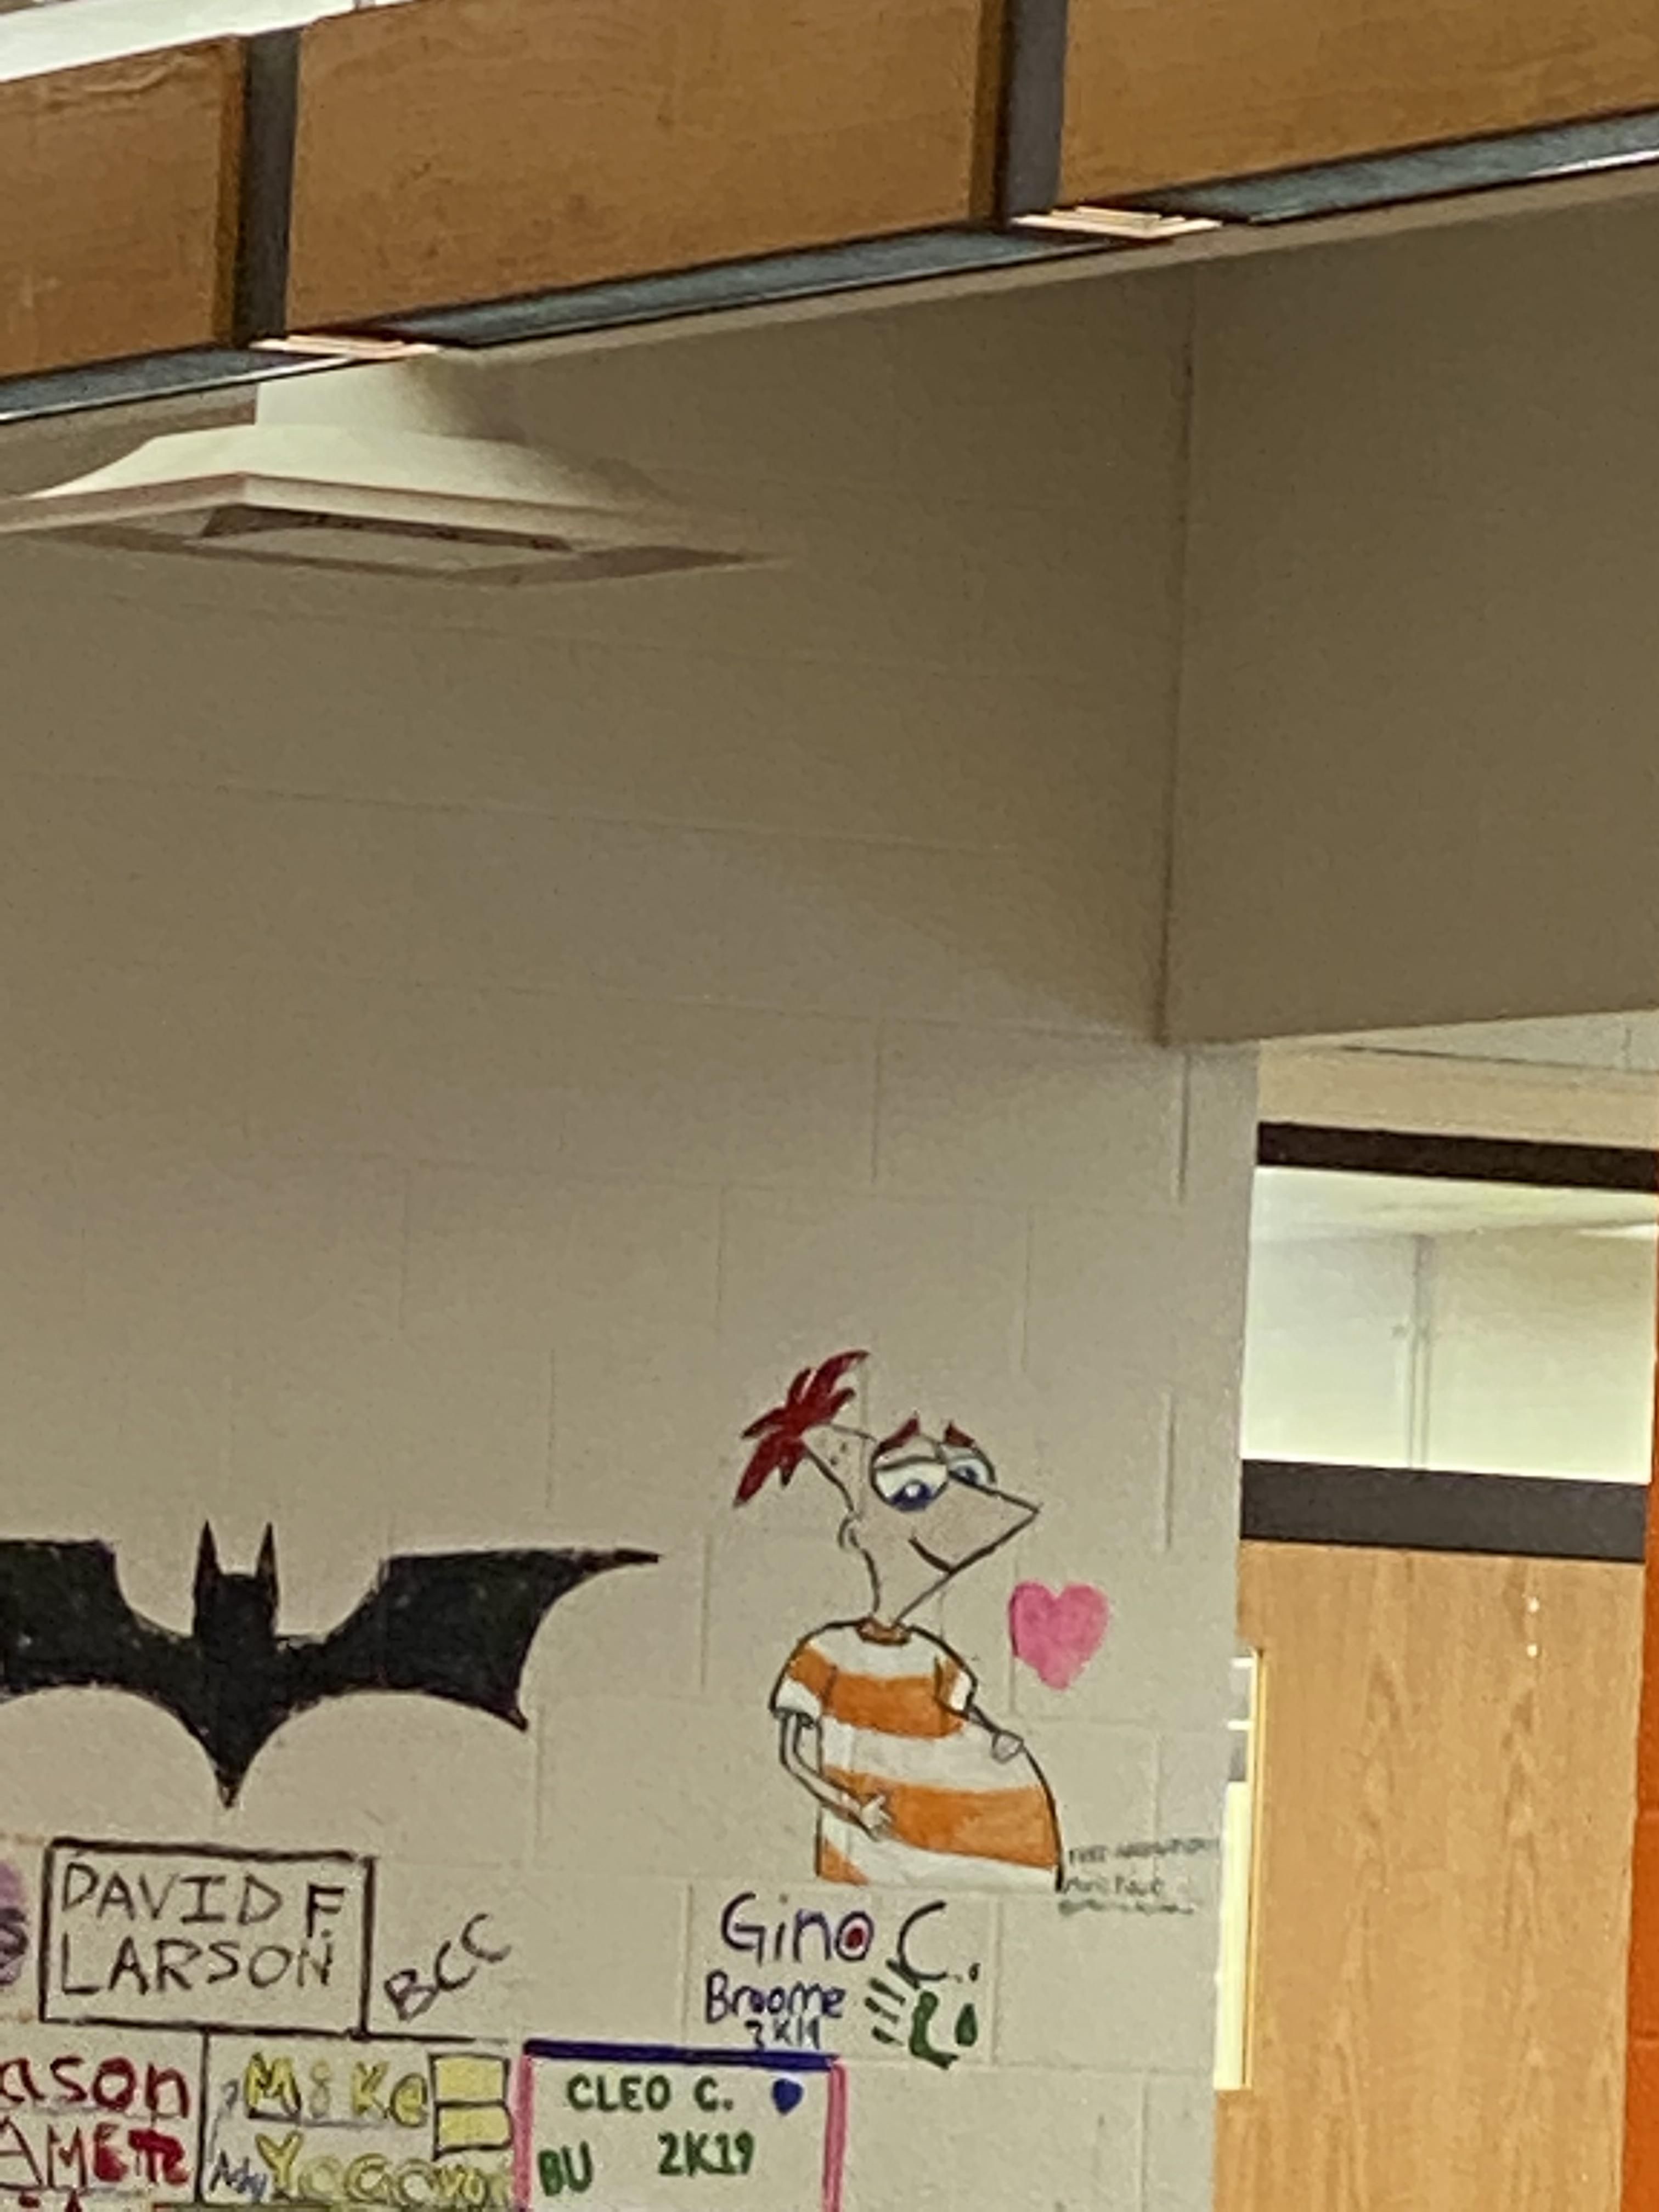 This is on the wall at my school